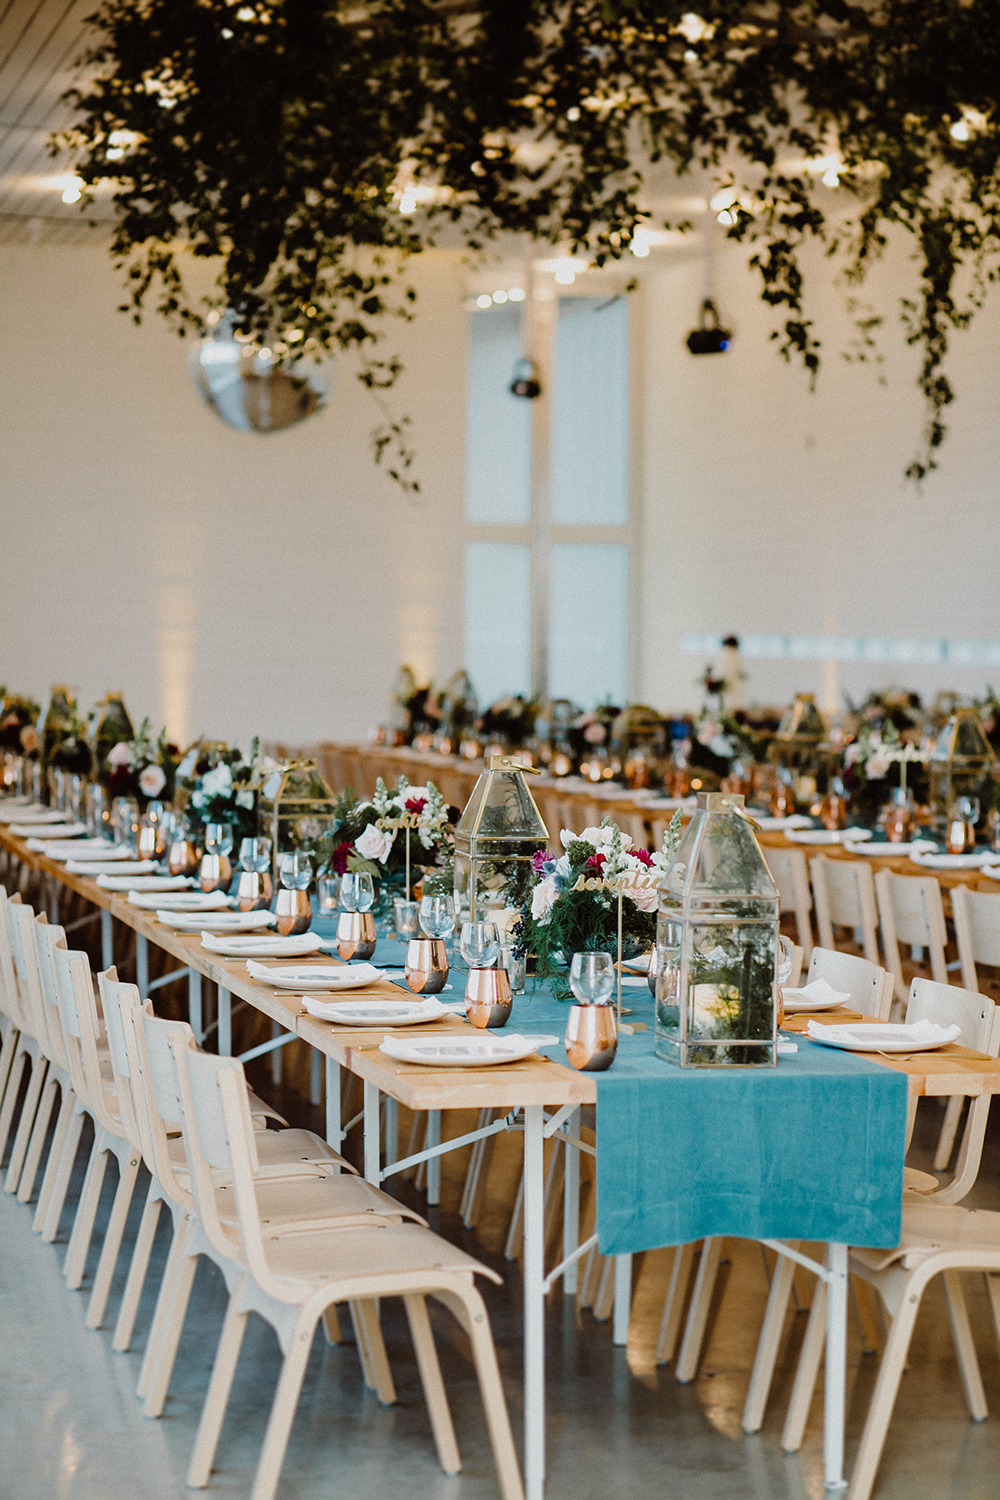 modern wedding receptions with teal - photo by Lisa Woods Photography https://ruffledblog.com/romantic-party-wedding-at-prospect-house